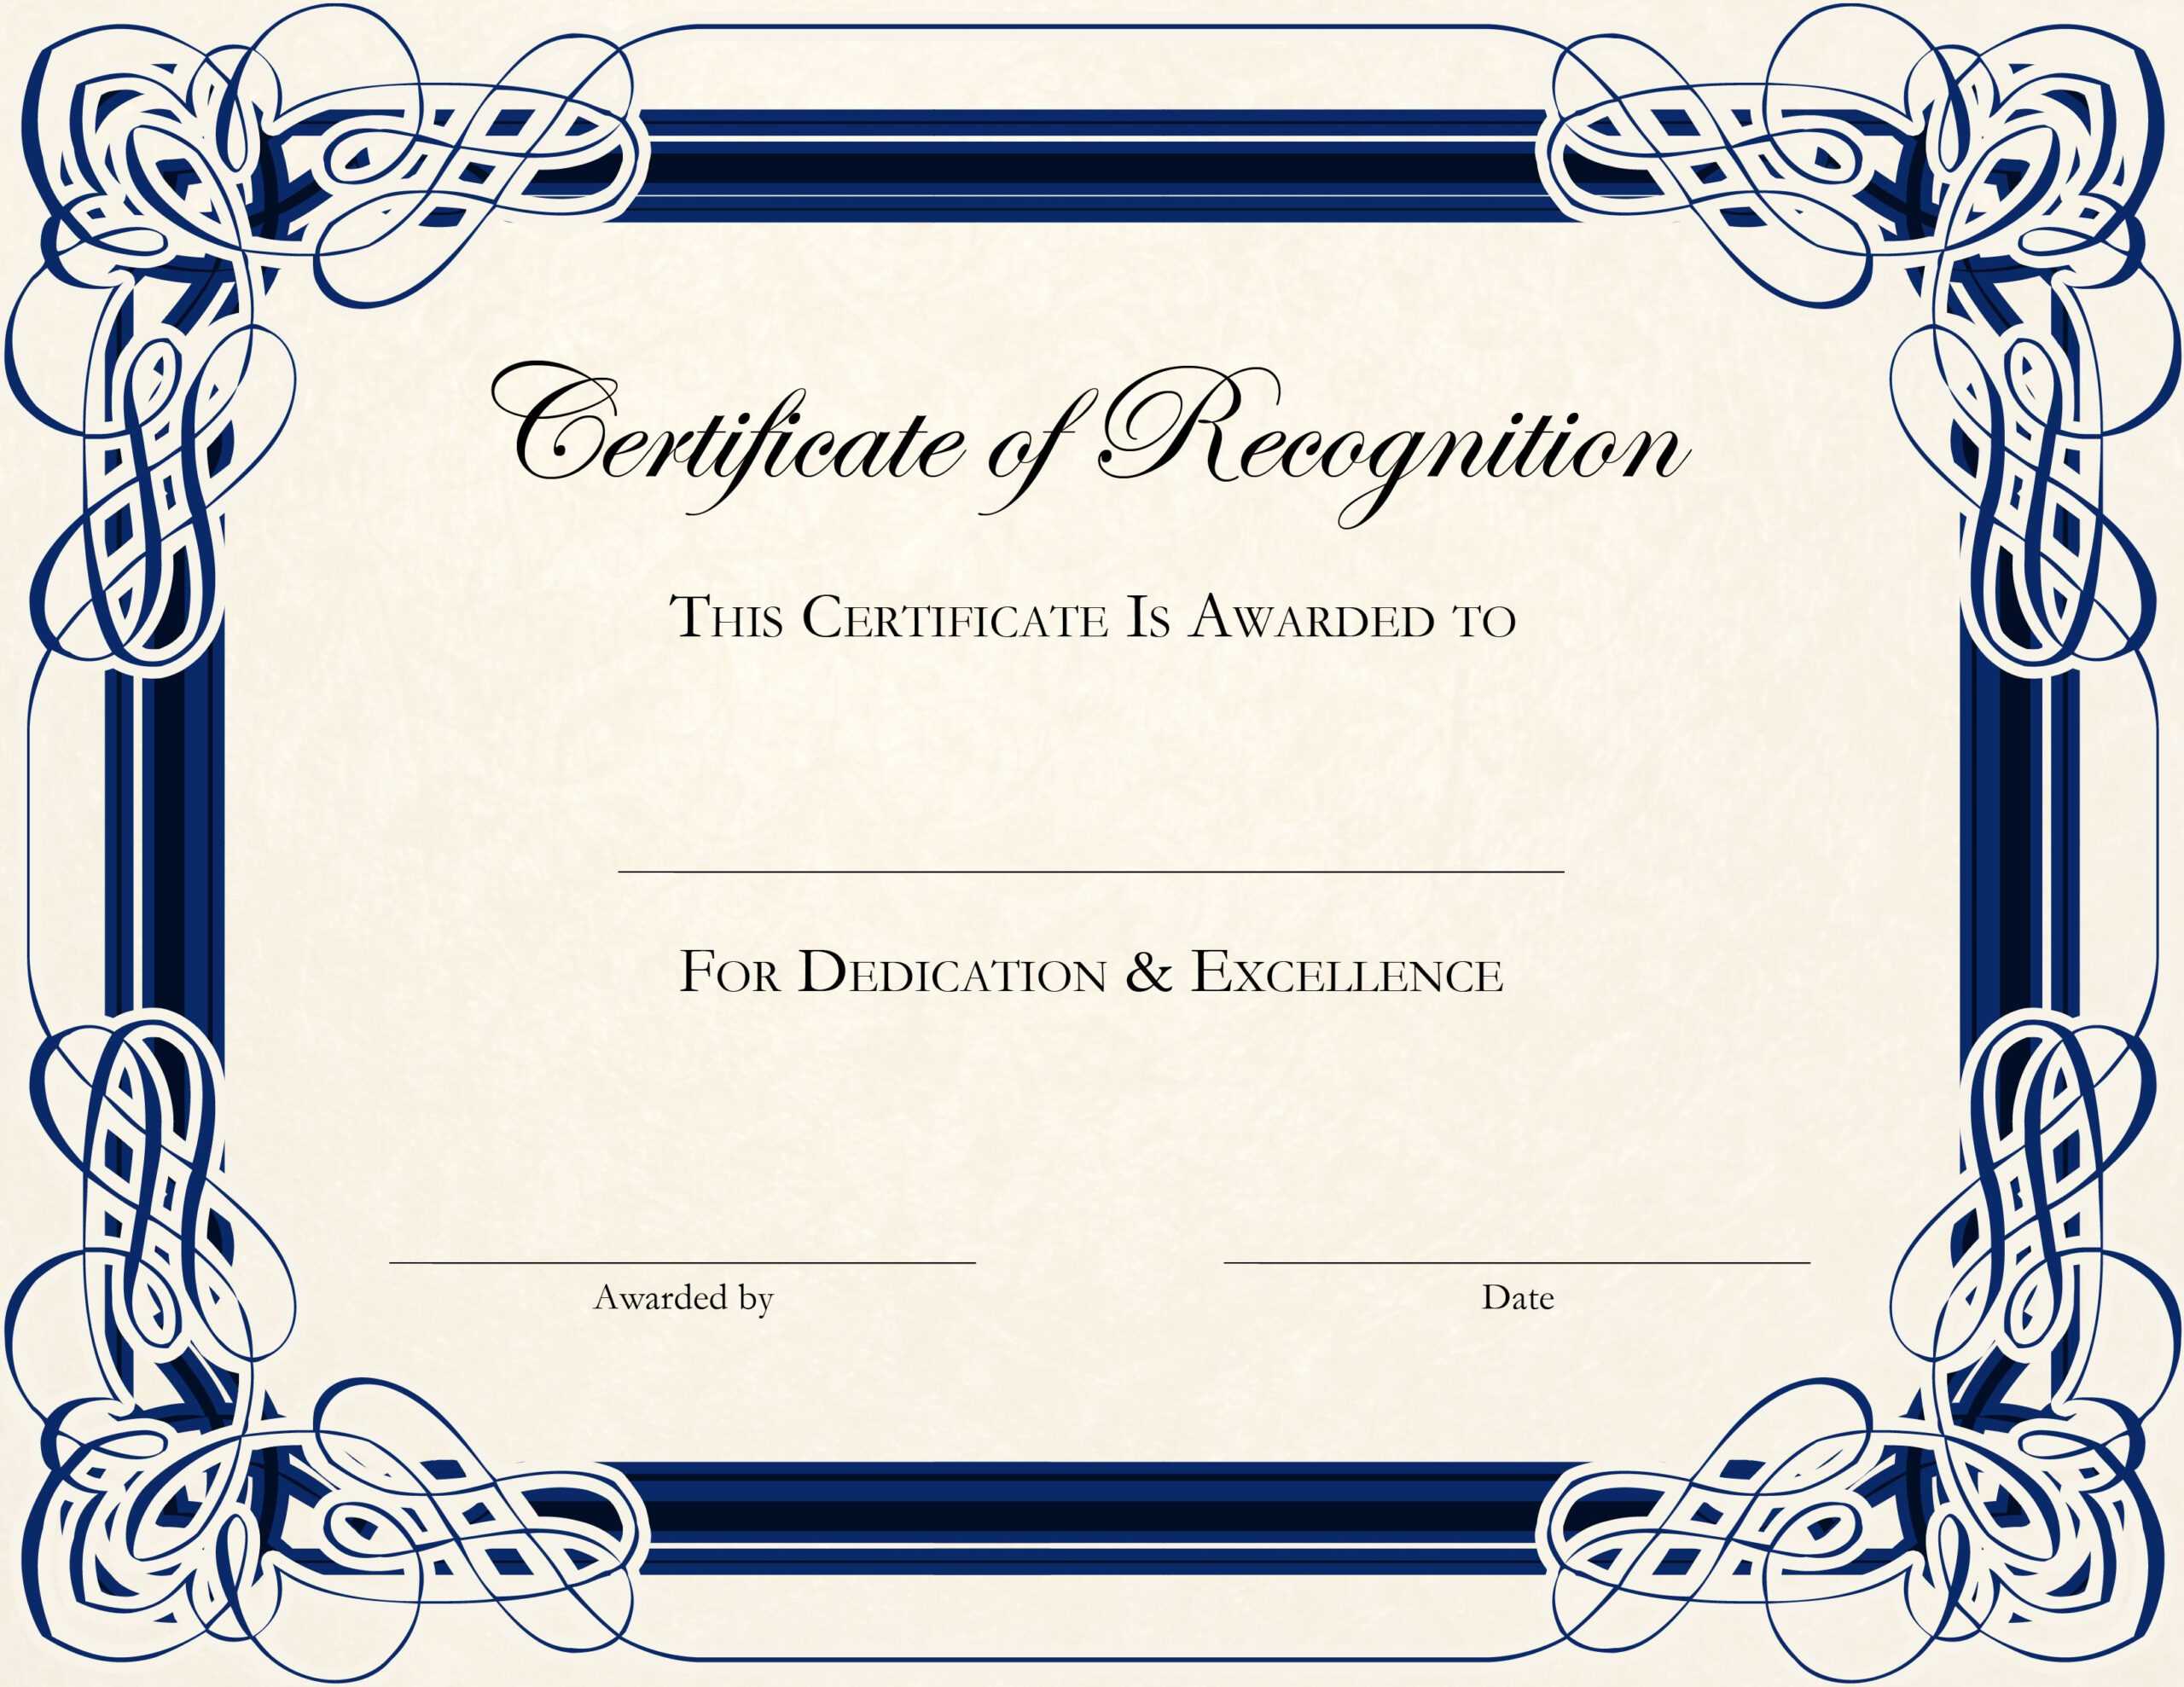 Certificate Template Designs Recognition Docs | Certificate With Sample Certificate Of Recognition Template